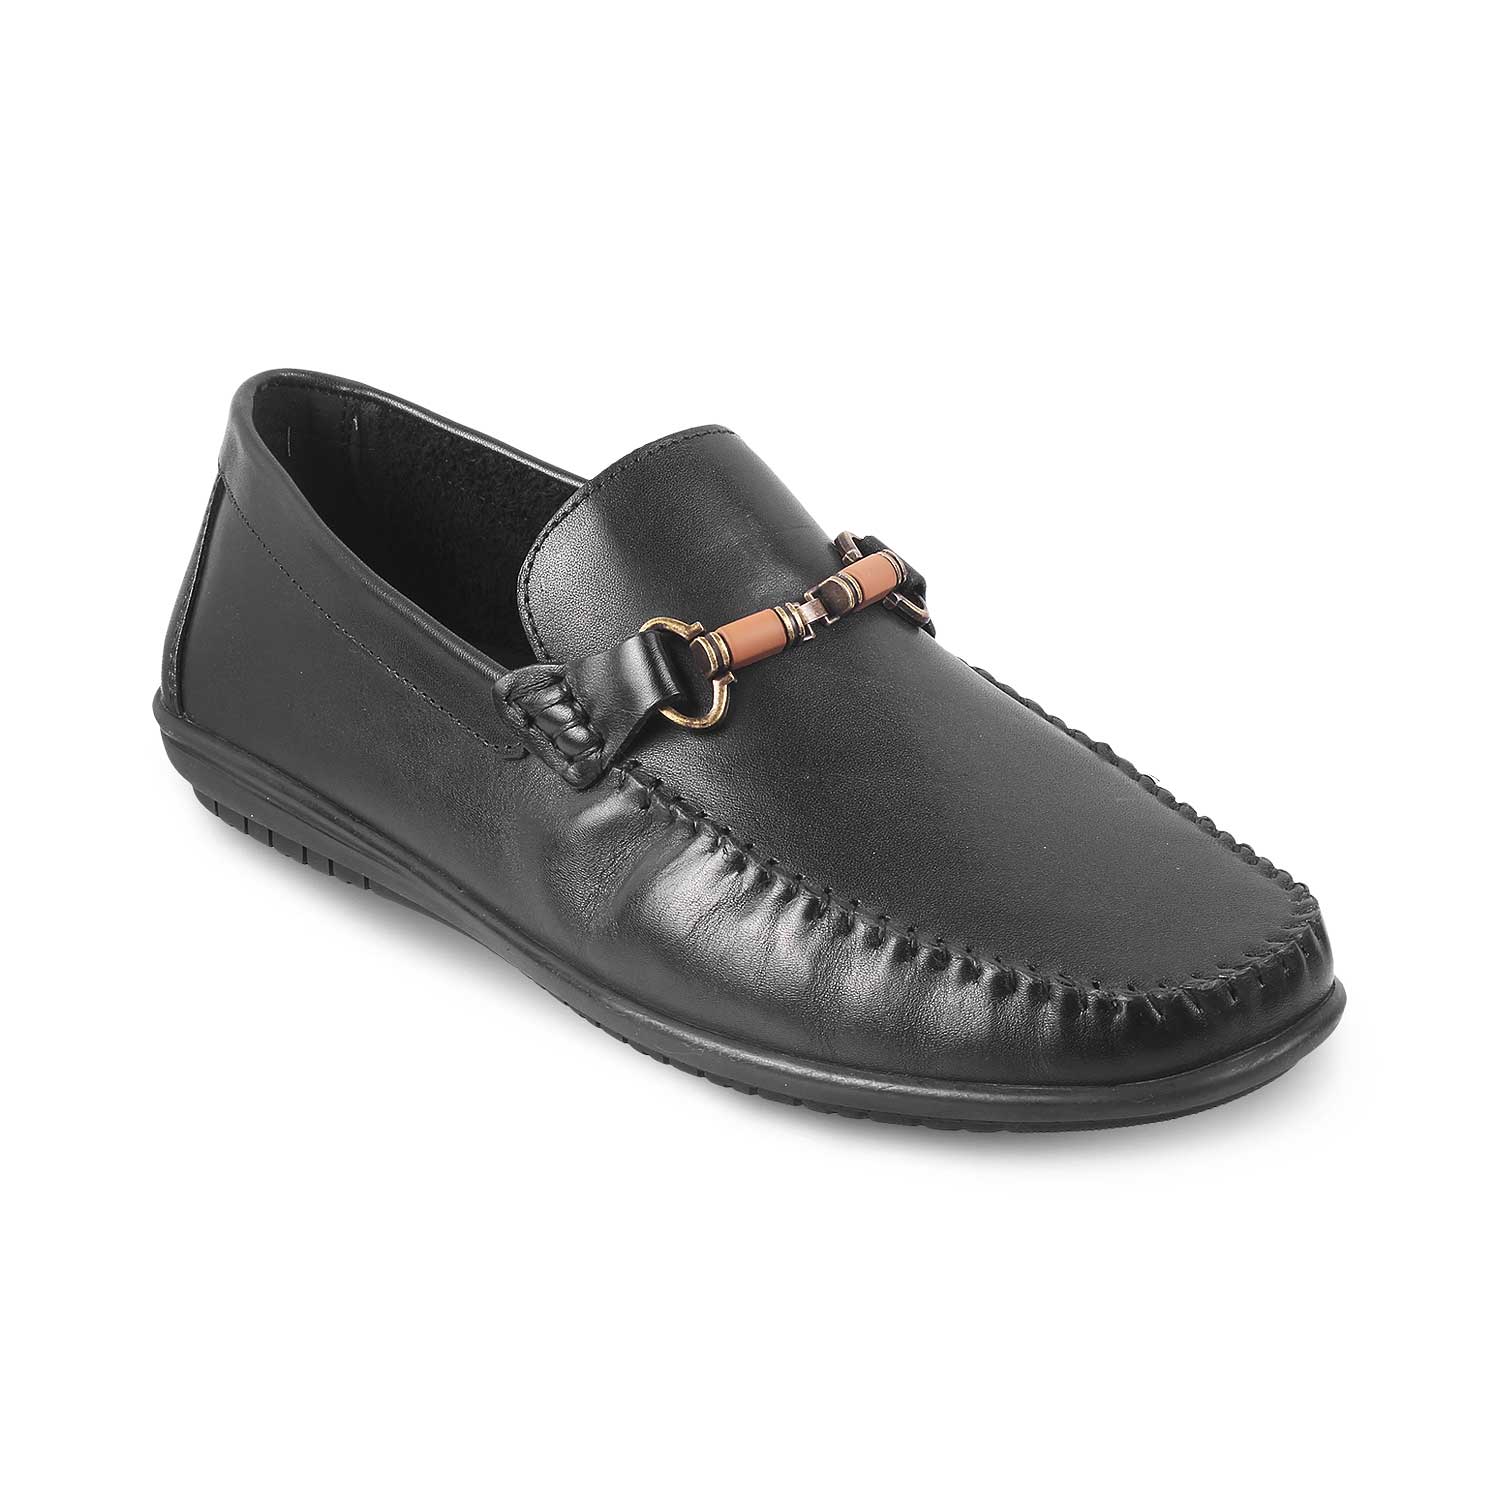 The Bucky Black Men's Leather Loafers Online at Tresmode.com